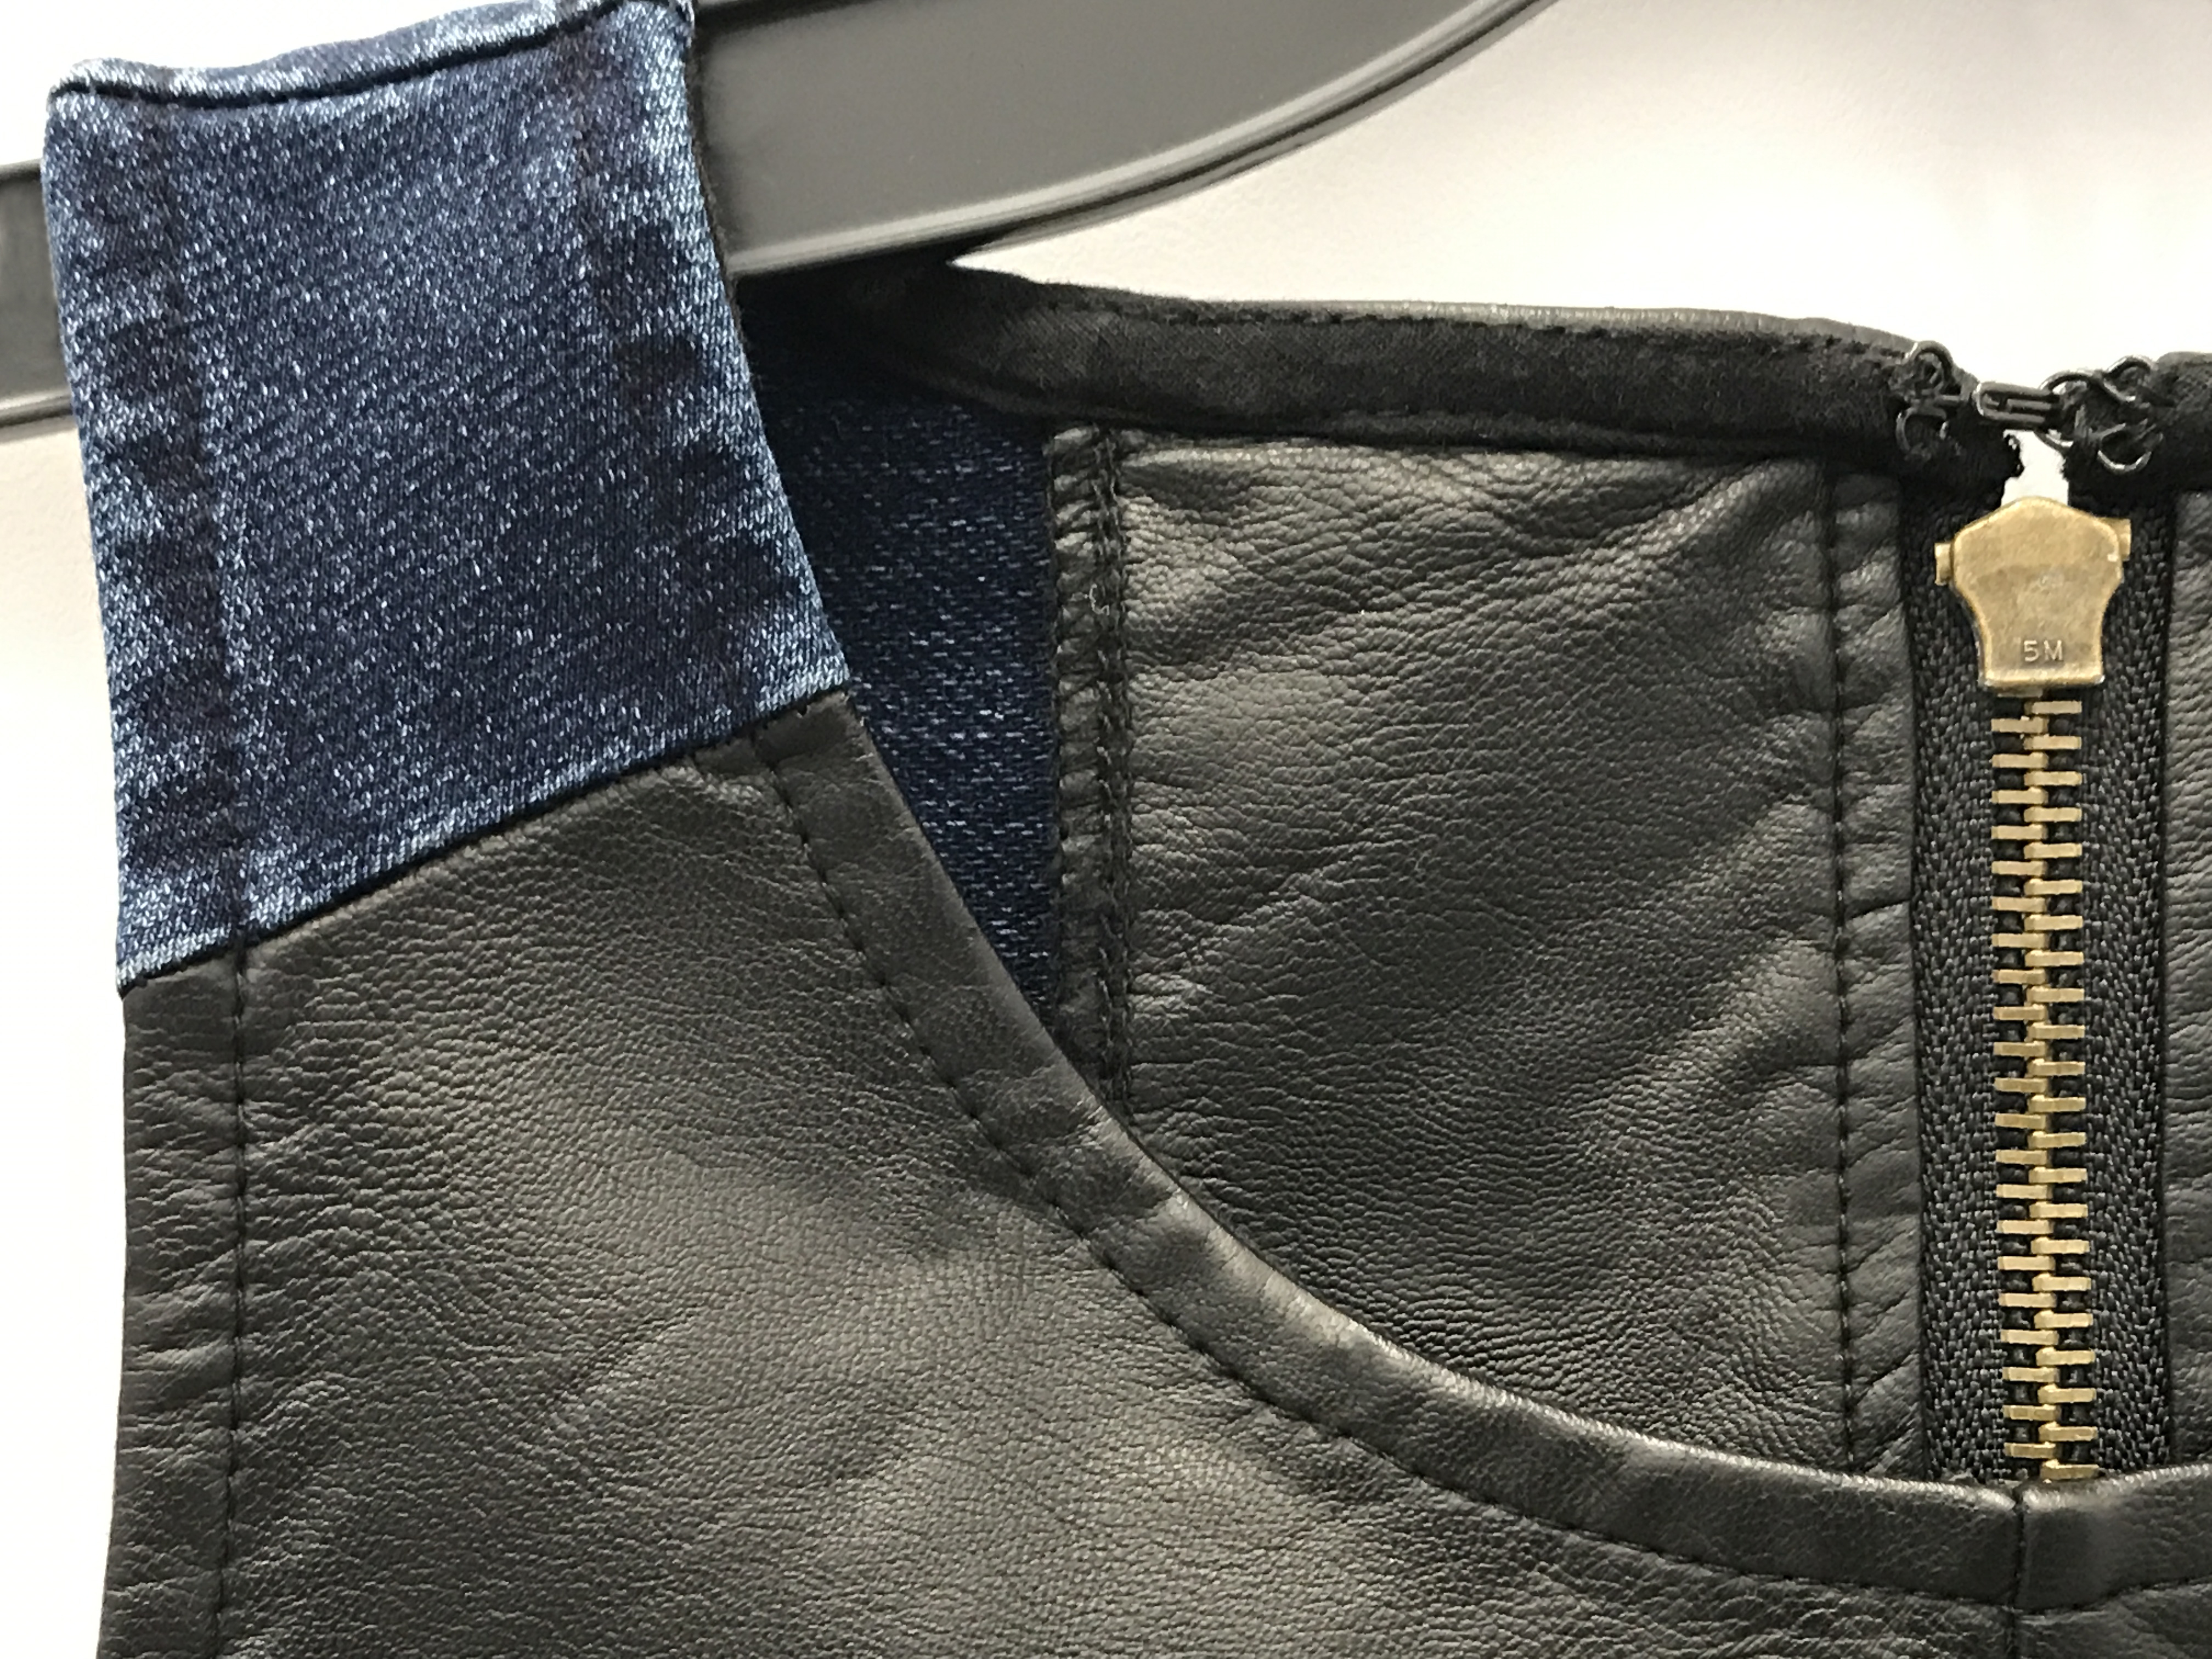 How to Fix A Cracked Leather Jacket - iFixit Repair Guide